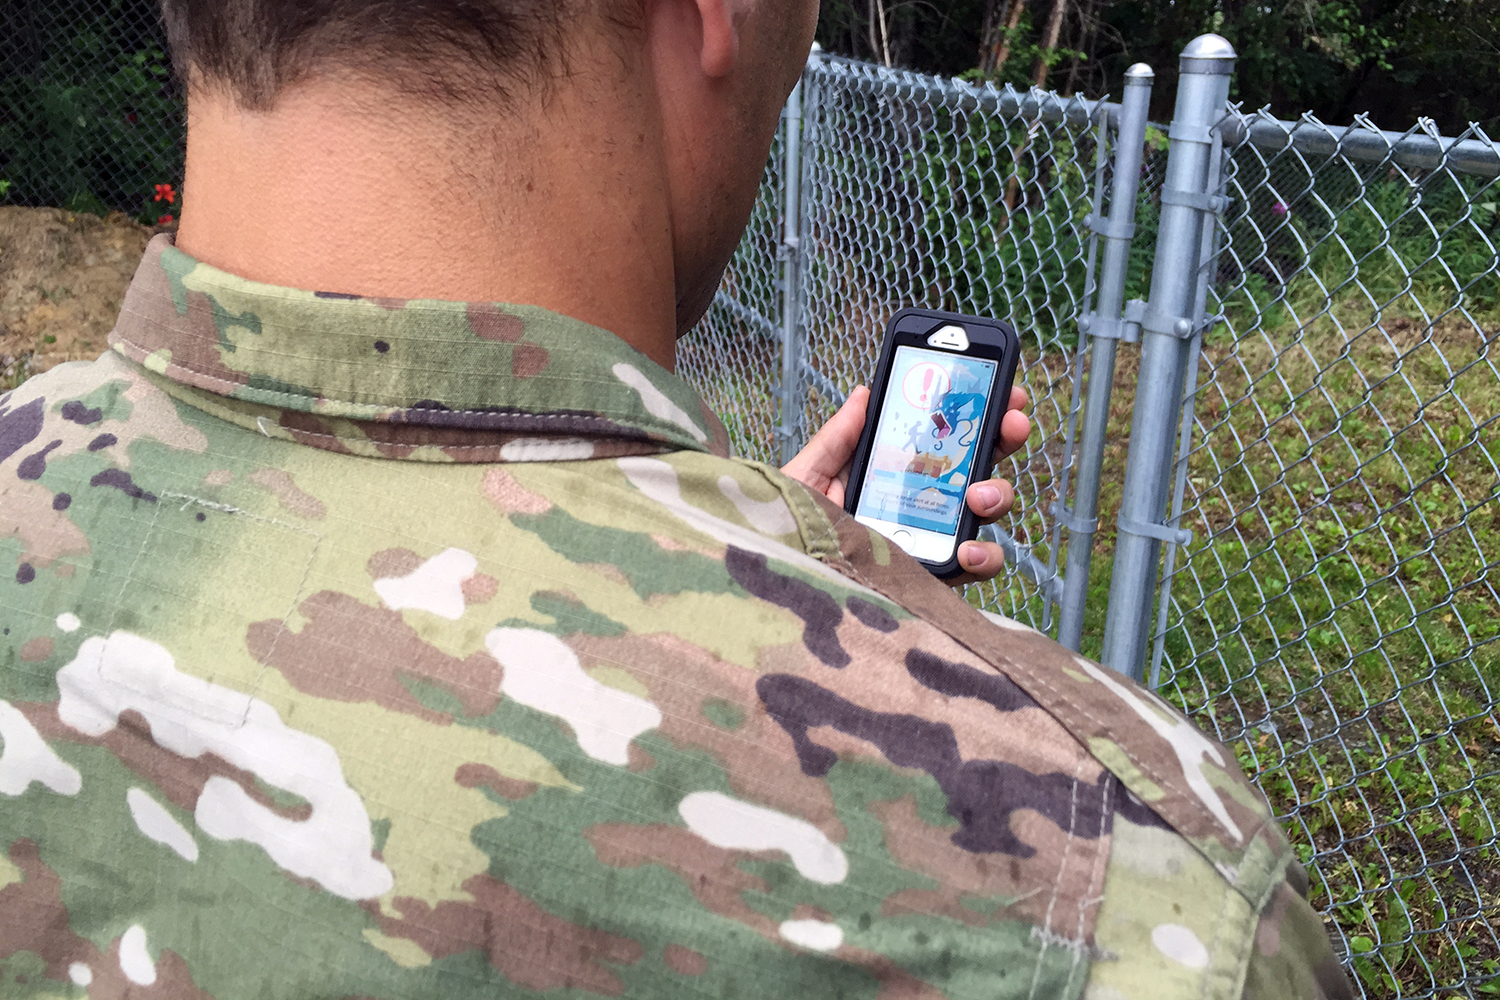 Base to Troops: Don't Chase Virtual Pokemon into Restricted Areas | Military.com